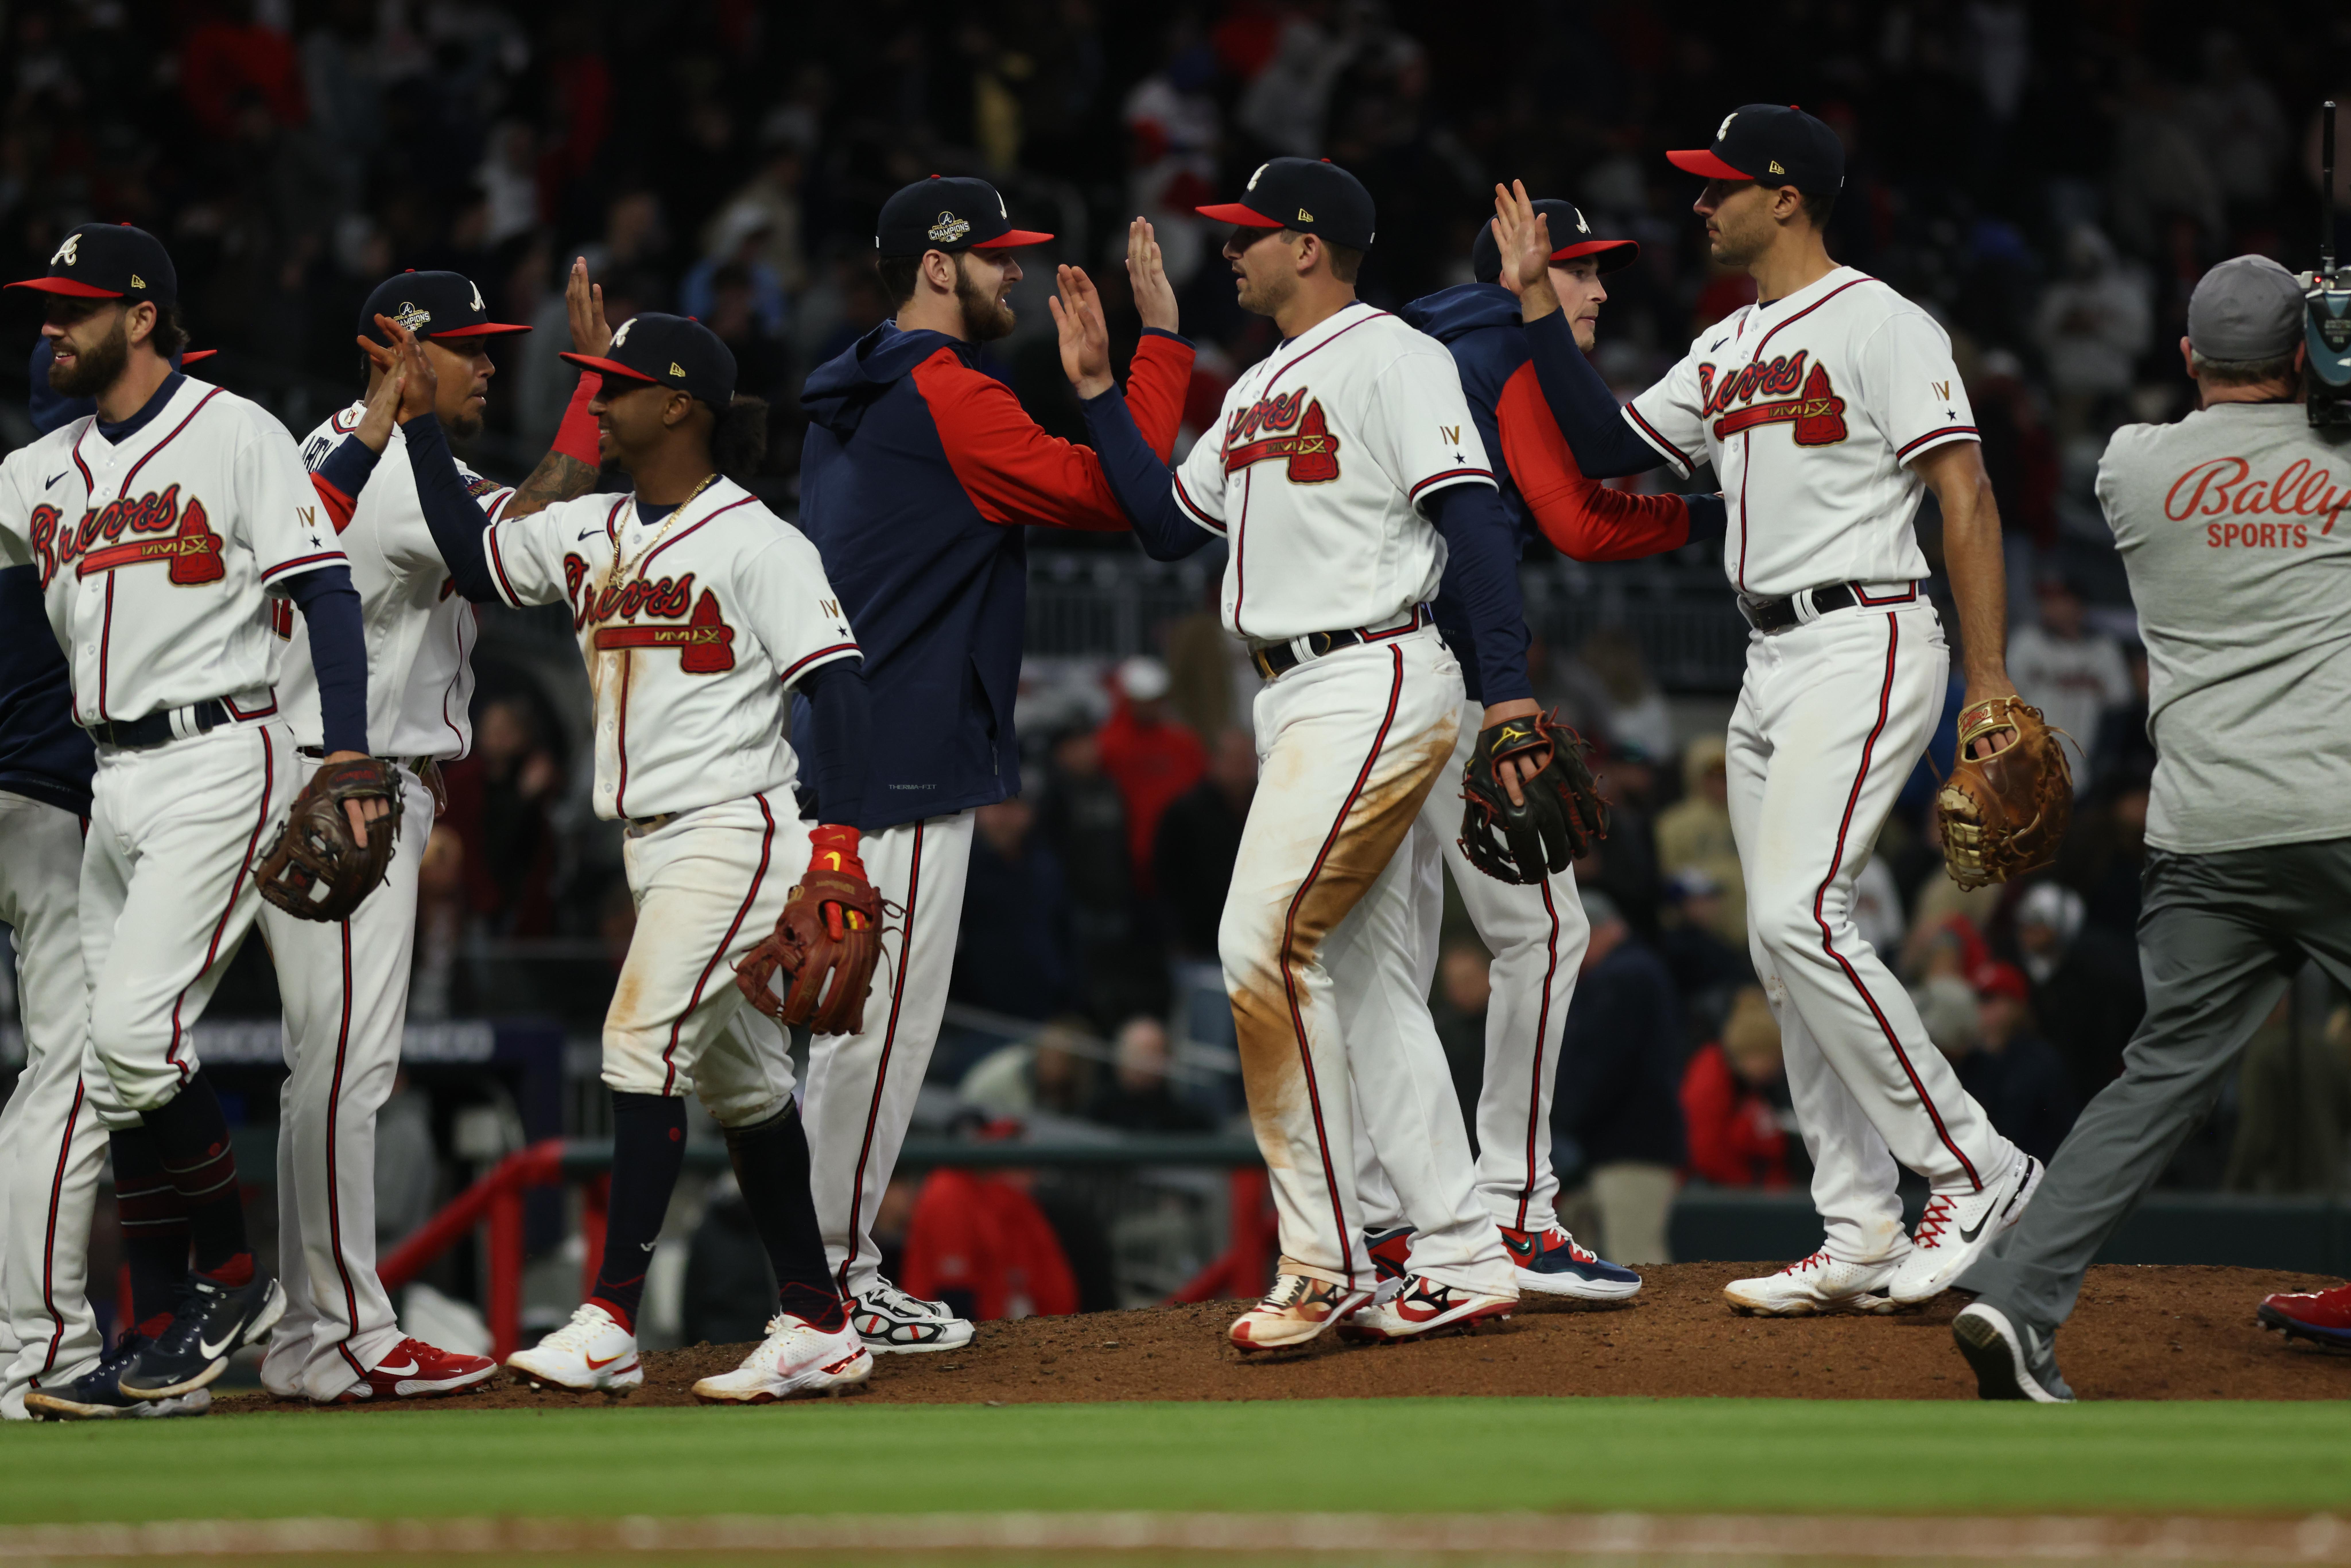 Bittersweet victory for Braves in World Series opener after Morton